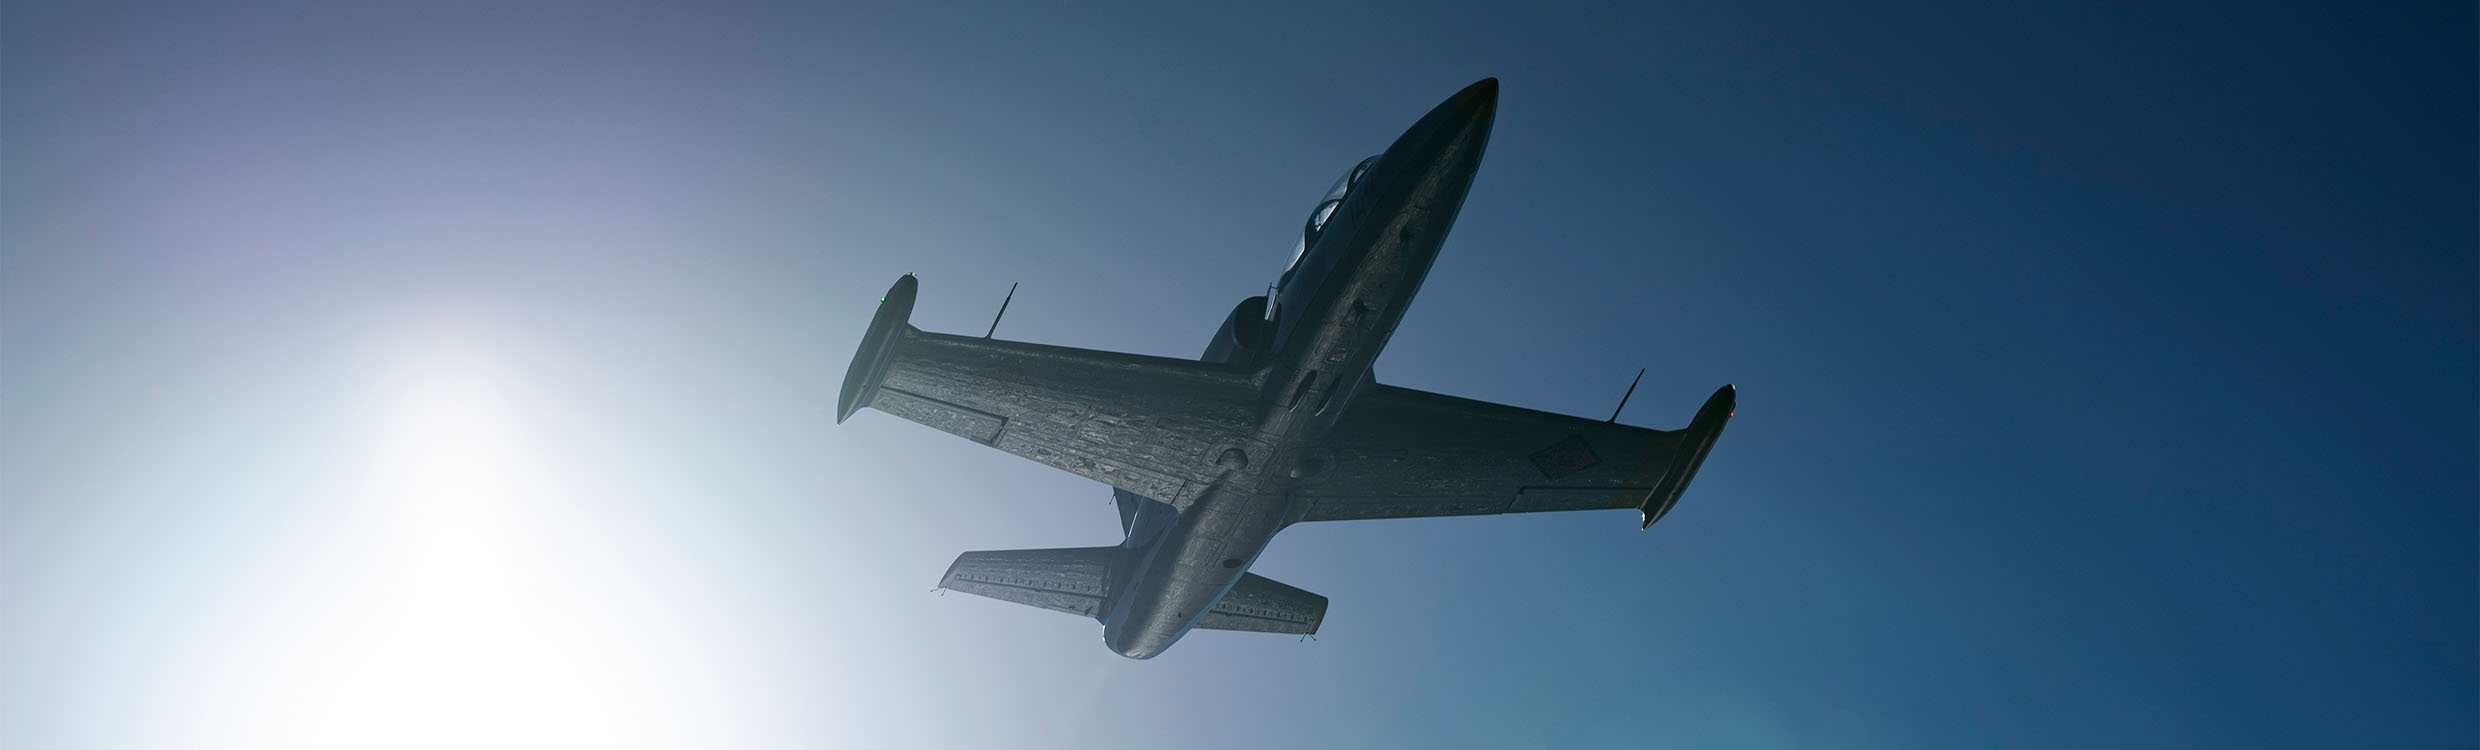 An L-39 Albatros jet against the blue sky with NovAtel’s products inside.